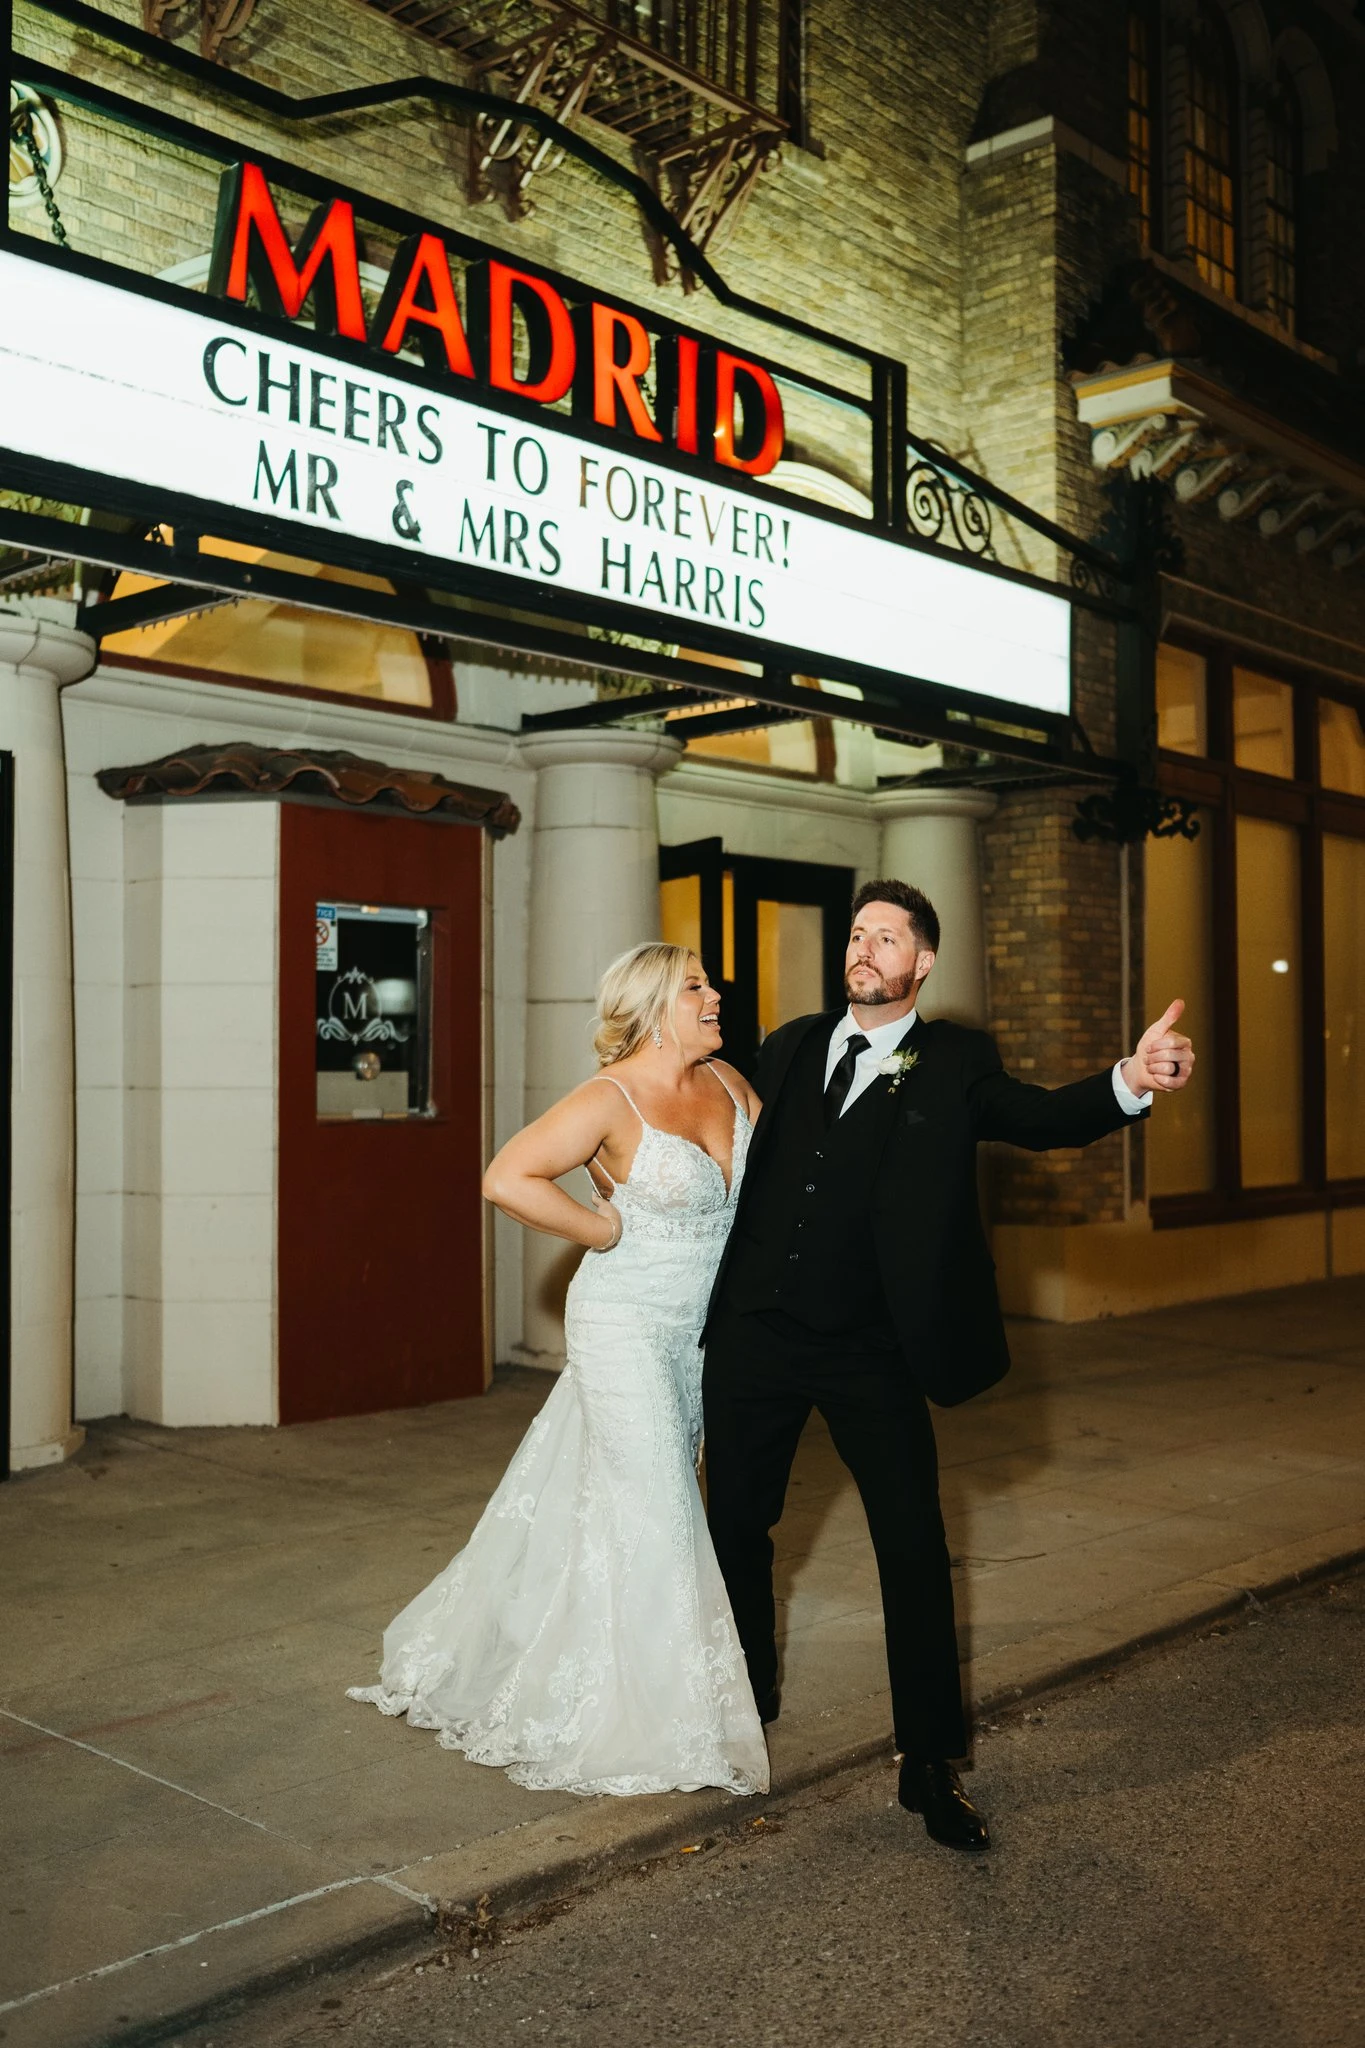 Bride and groom outside a movie theater